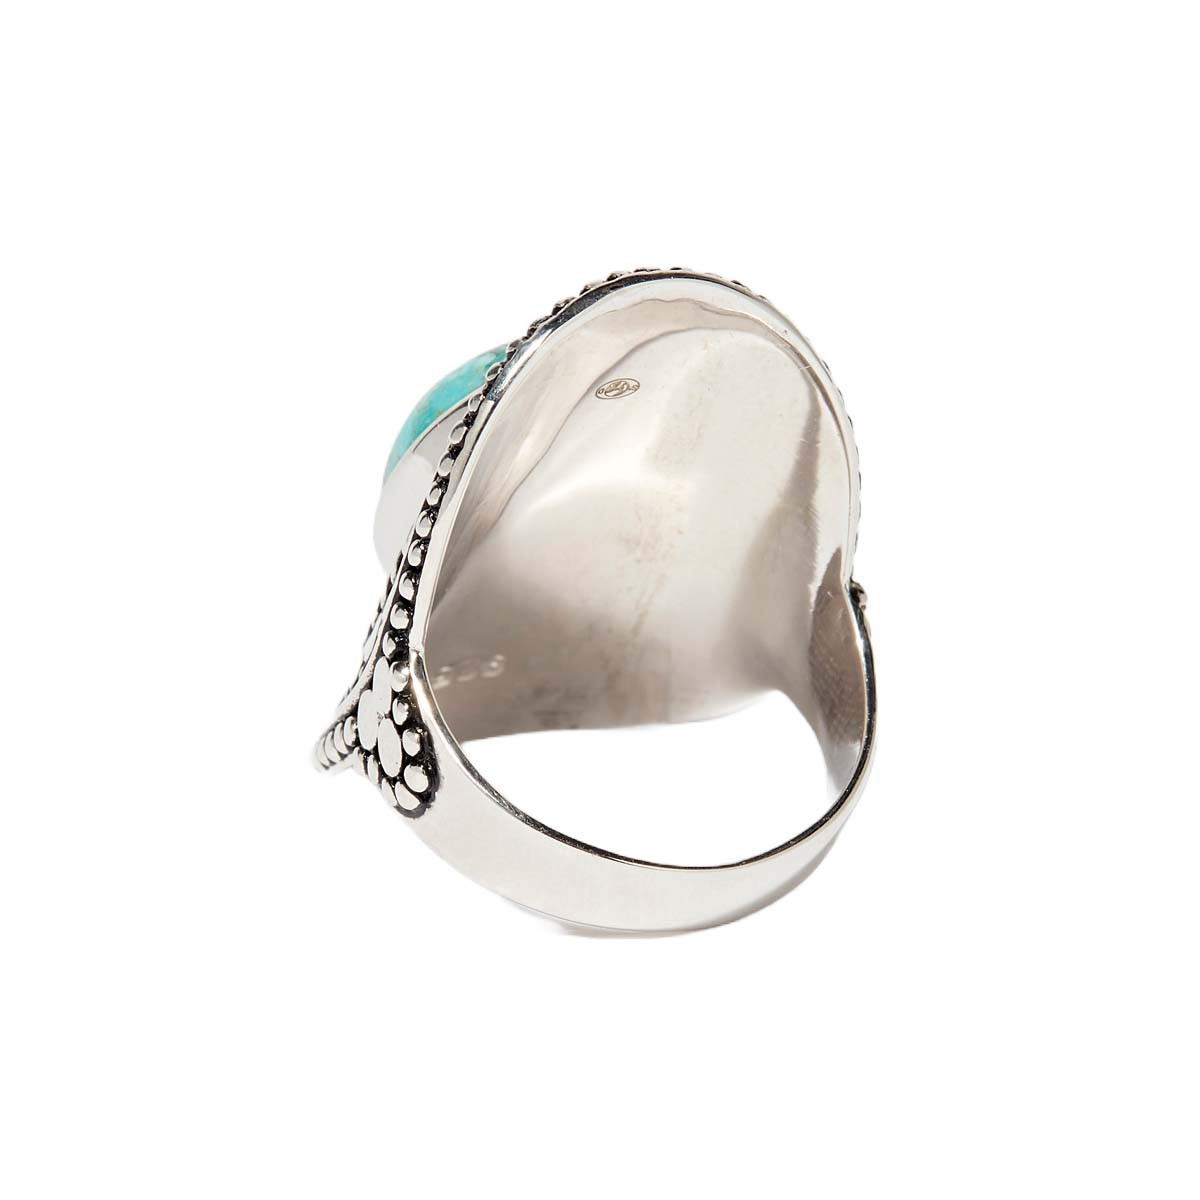 Bague "Nahual Turquoise" Argent 925